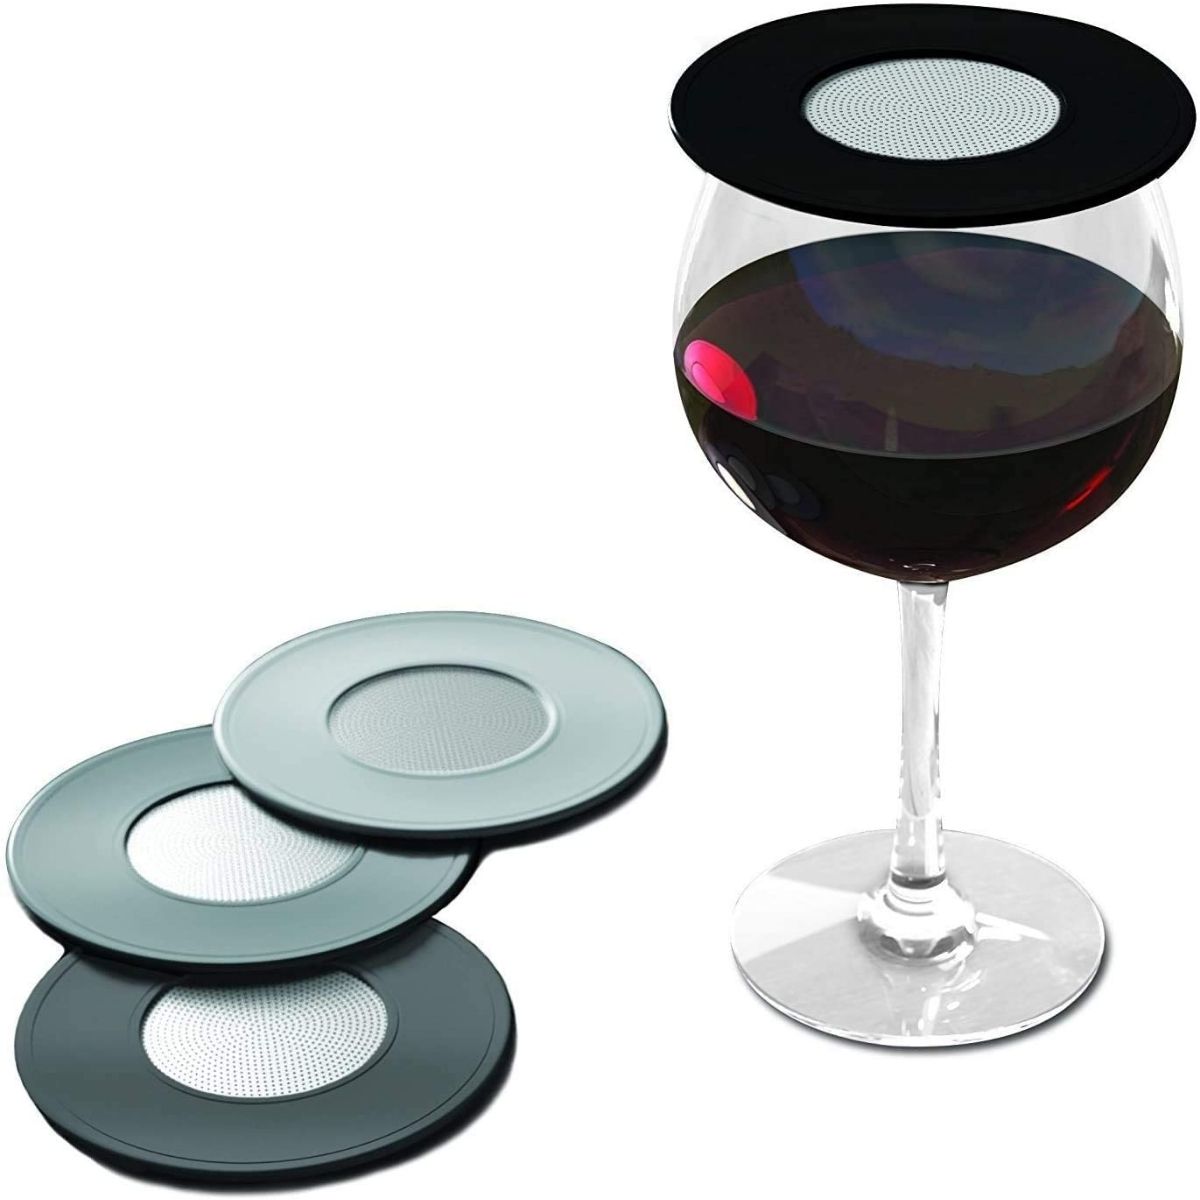 The Best Gifts for Wine Lovers Option: CoverWare Store Drink Tops Ventilated Silicone Covers